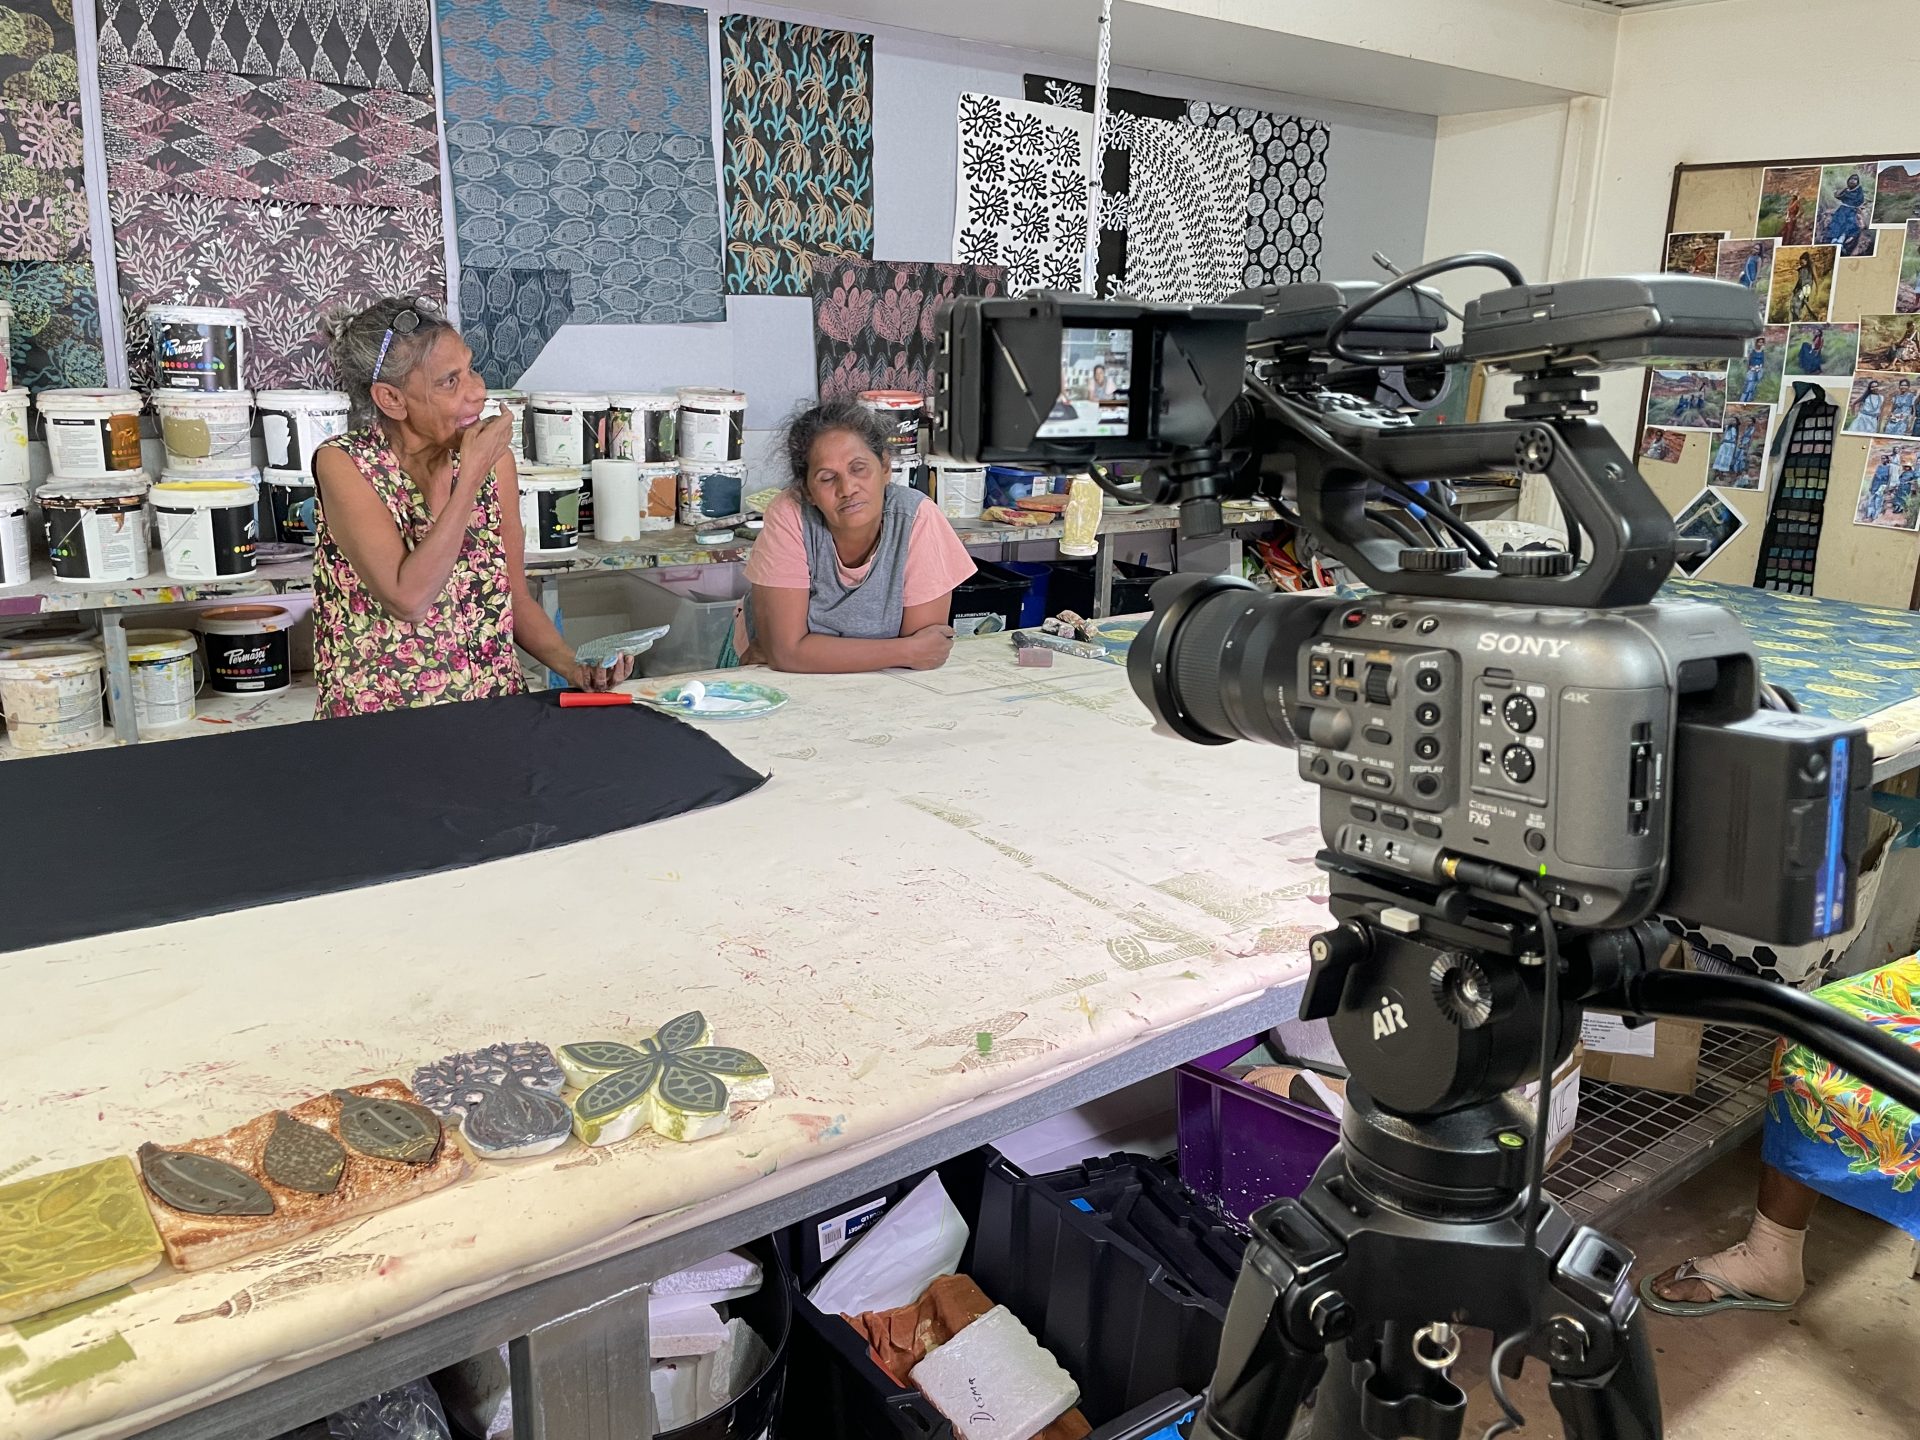 Behind the scenes for WA Museum Digital Art Project, Dora Griffiths (left) and Jan Griffiths (right), Waringarri Aboriginal Arts, Miriwoong Country, Kununarra, WA, 2022. Image courtesy of Sohan Ariel Hayes & Devris Hasan.